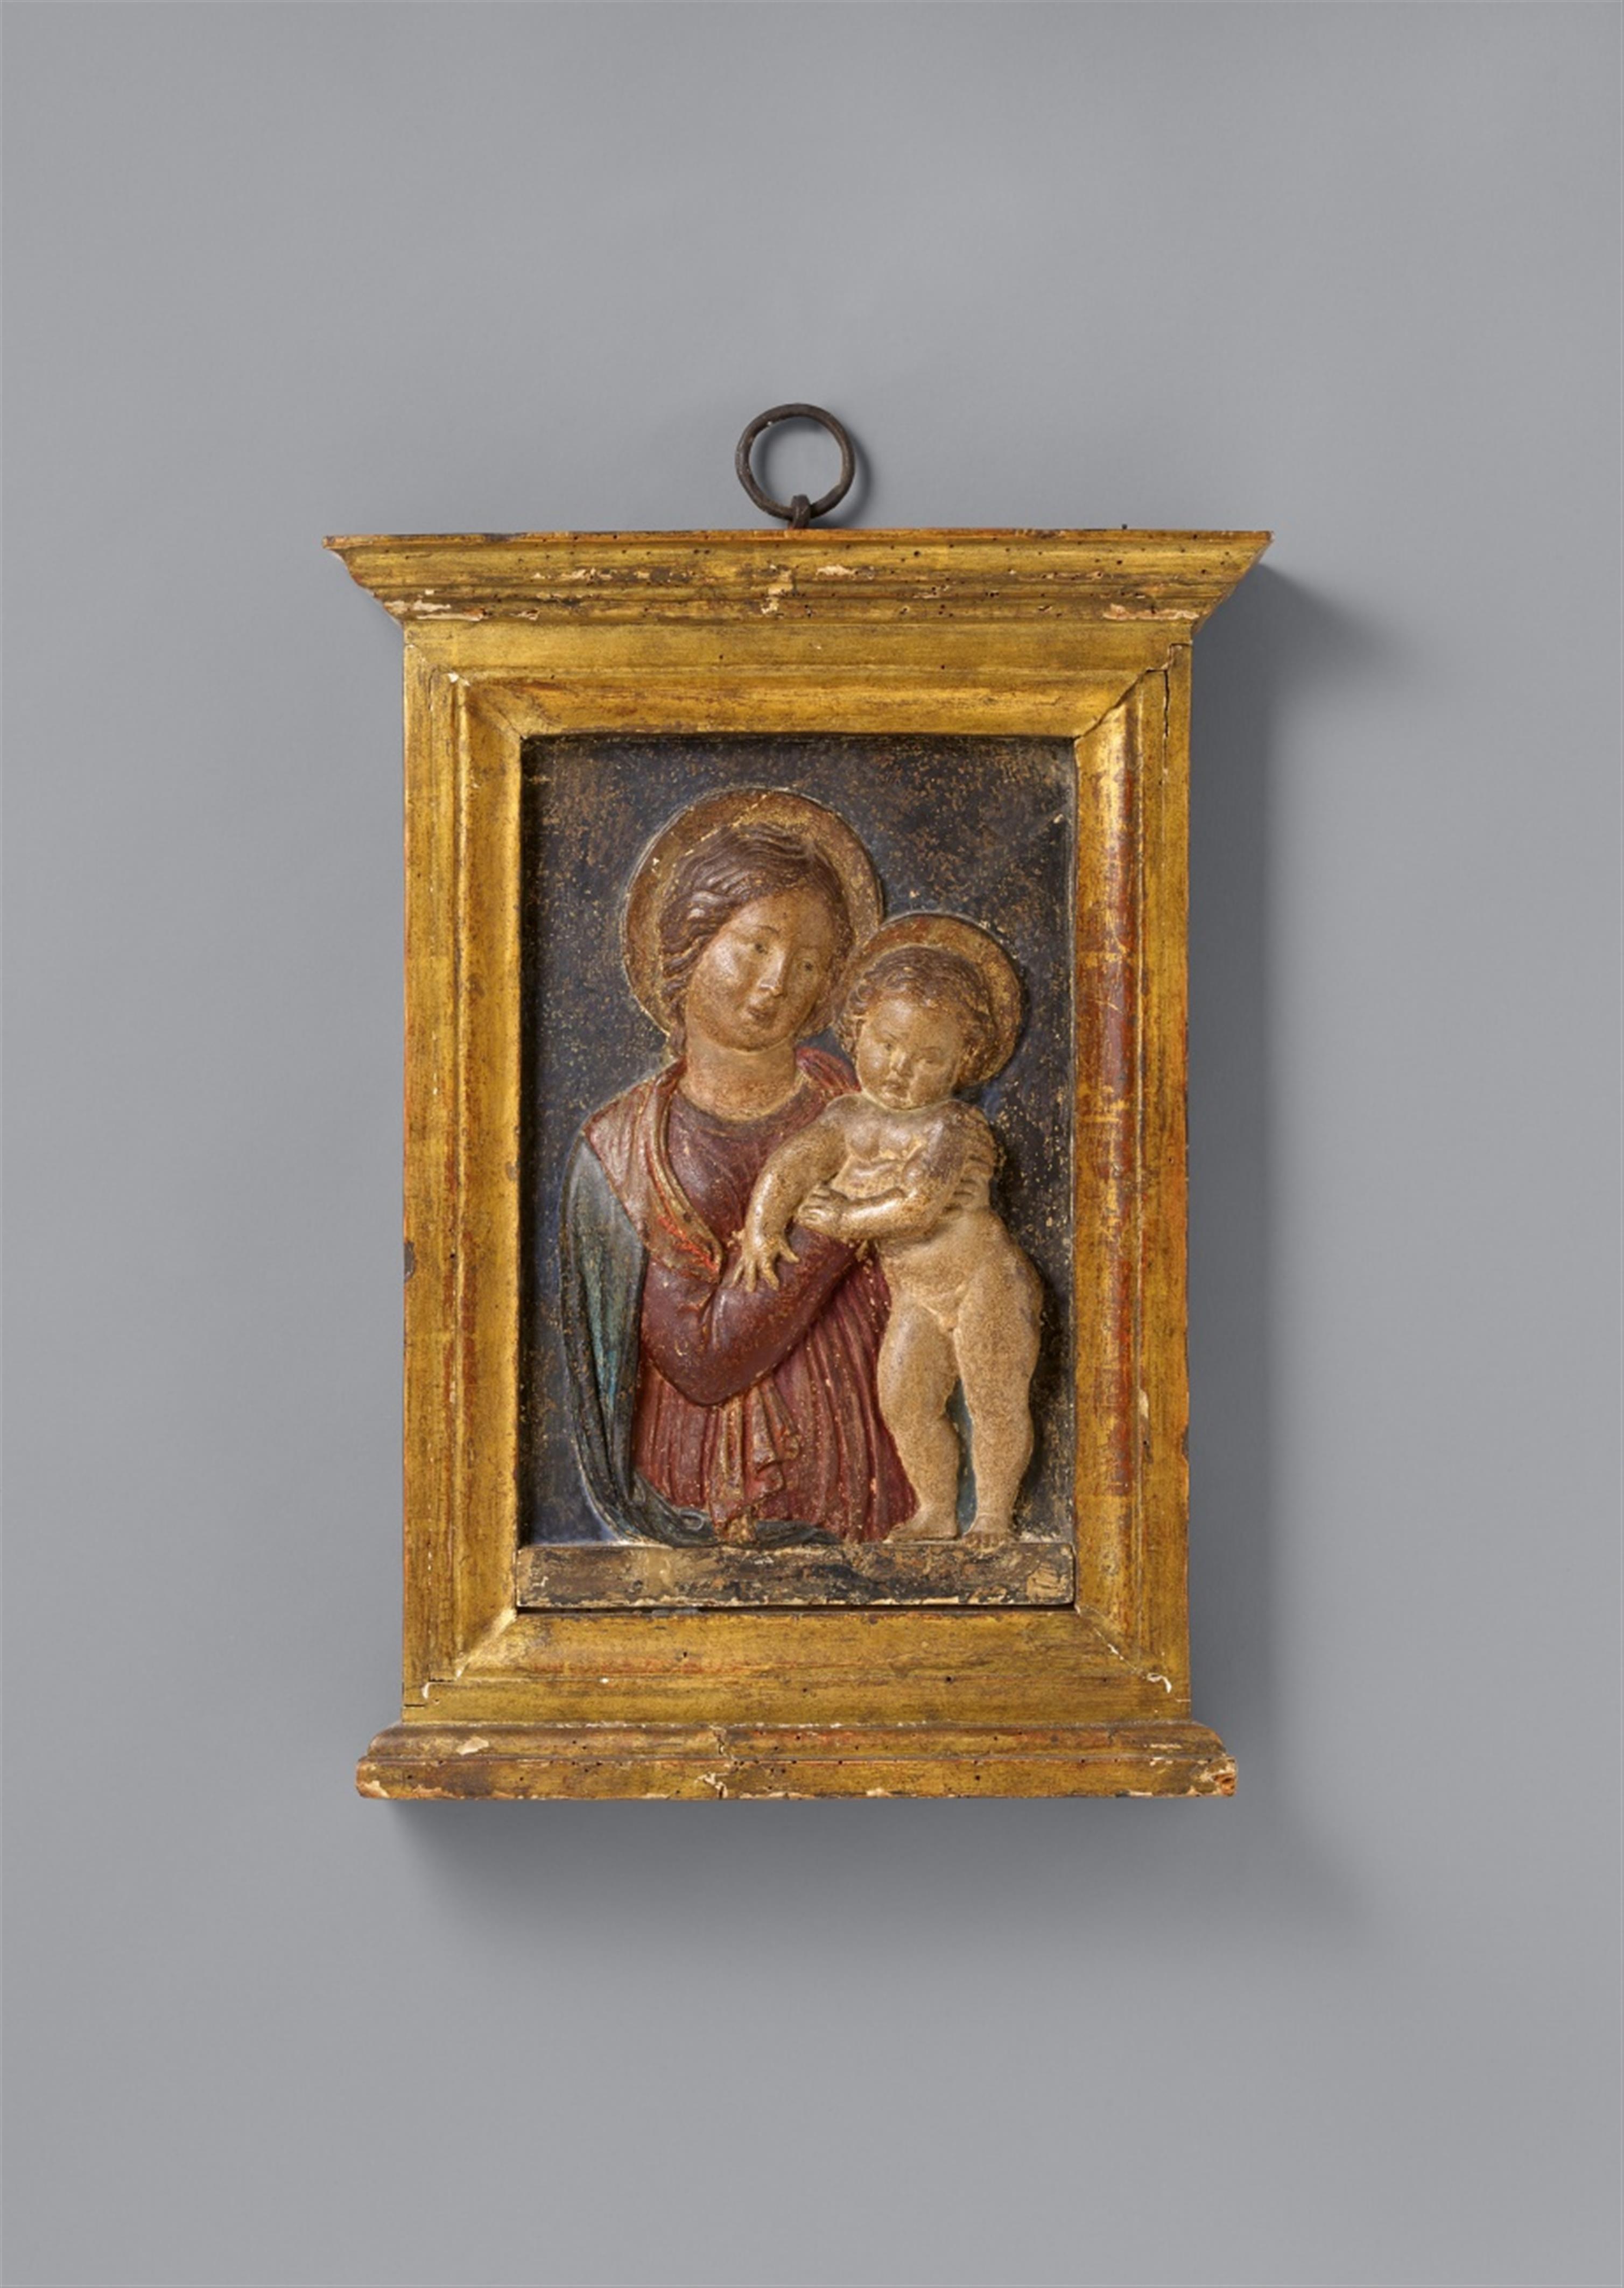 Northern Italy 15th century - A 15th century North Italian carved wooden relief of the Virgin and Child - image-1